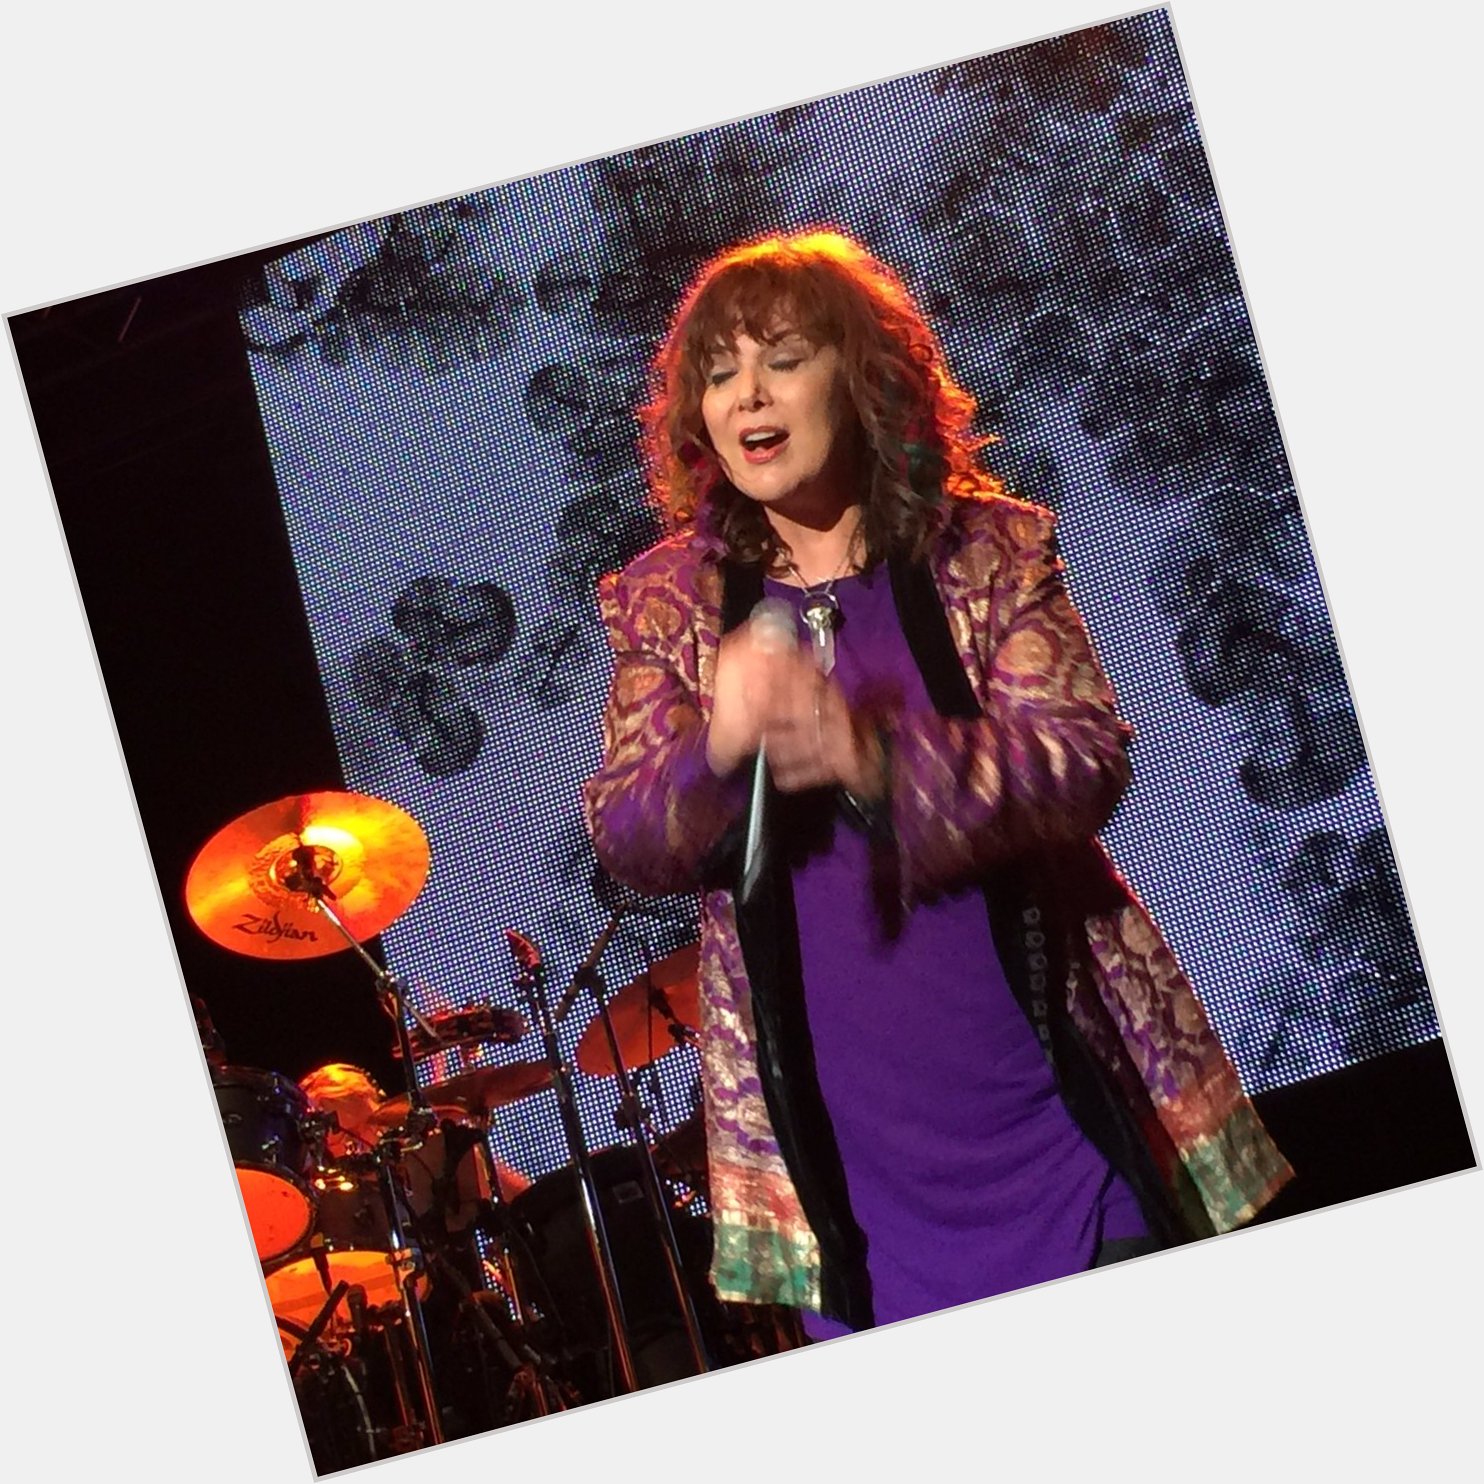 A very HAPPY BIRTHDAY to The Queen of Rock - Ann Wilson of Heart!  